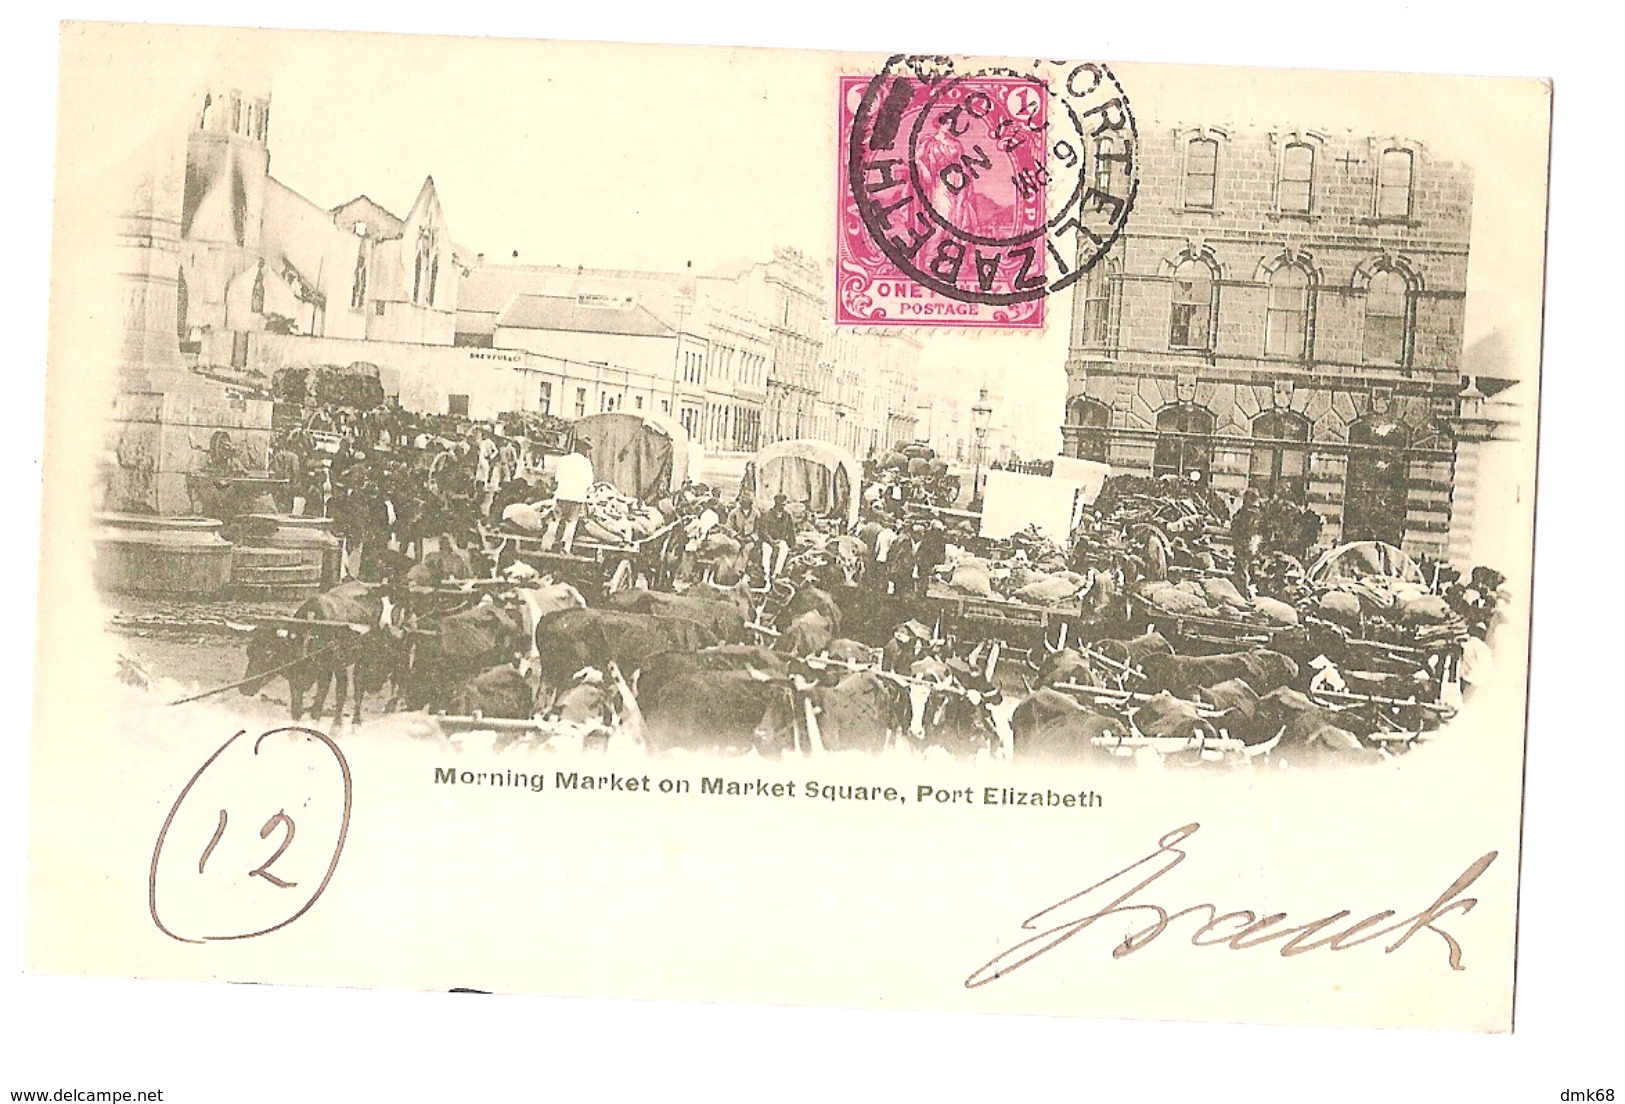 SOUTH AFRICA - PORT ELIZABETH - MORNING MARKET ON MARKET SQUARE - STAMP - MAILED TO ITALY 1902 ( 2777) - South Africa